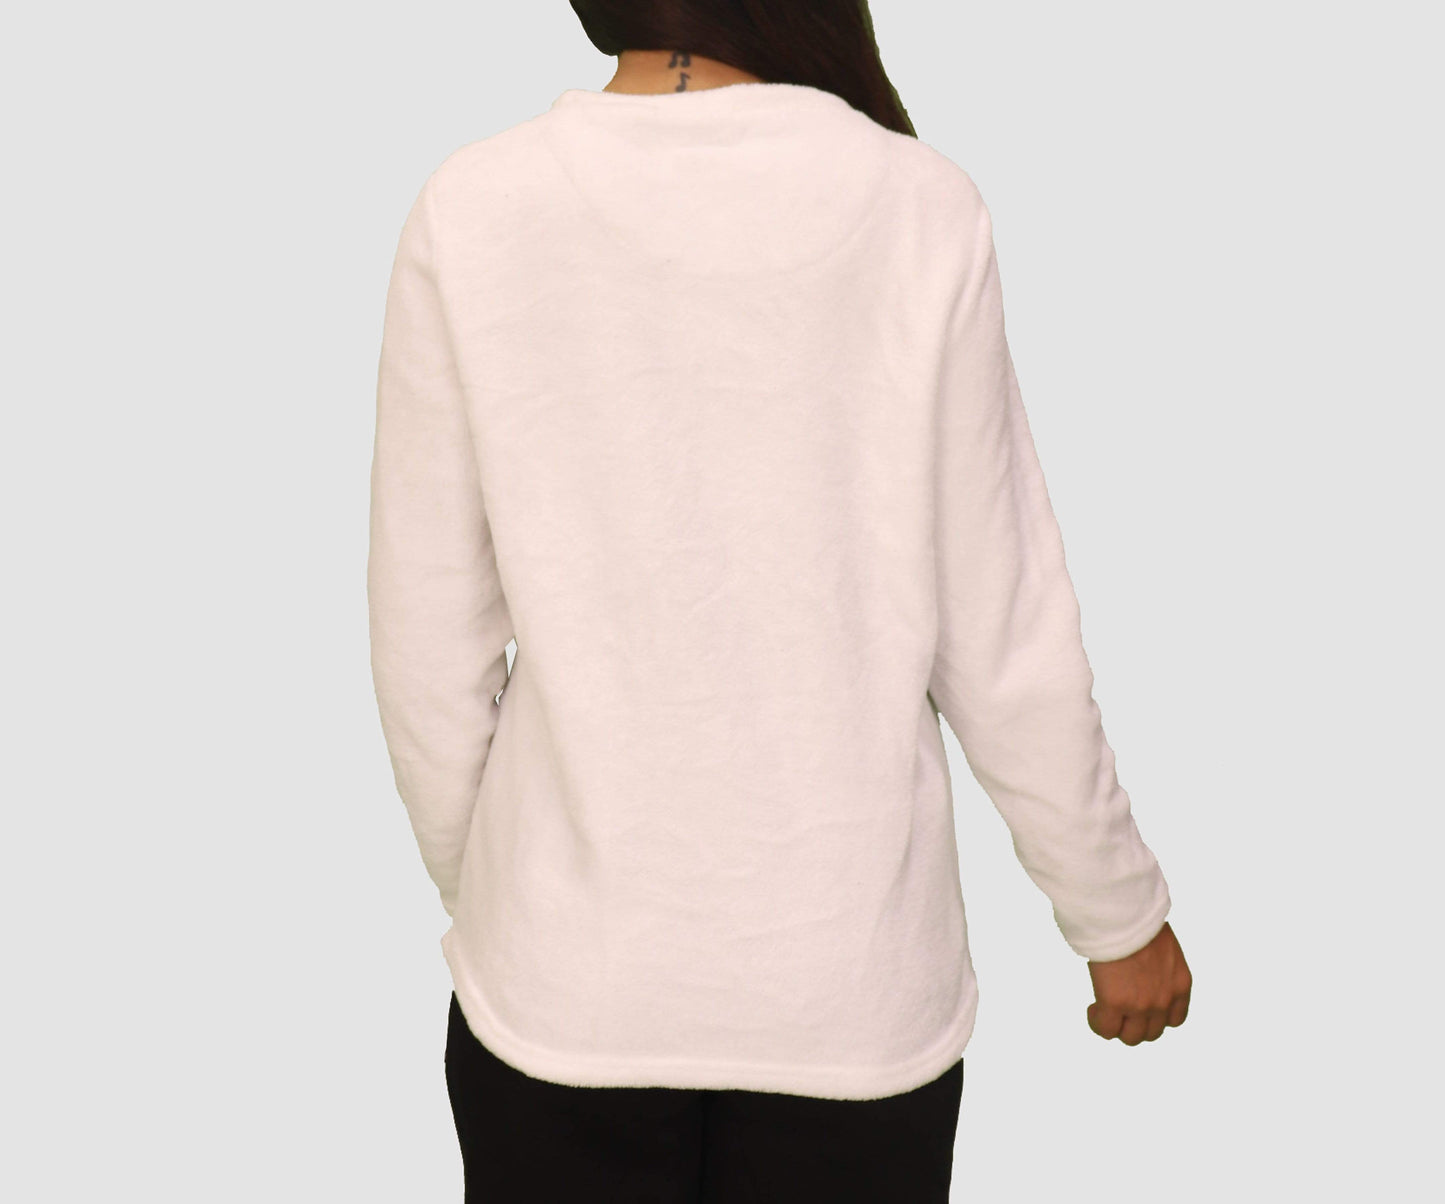 LOVE TO LOUNGE Womens Tops S / White Long Sleeve Top